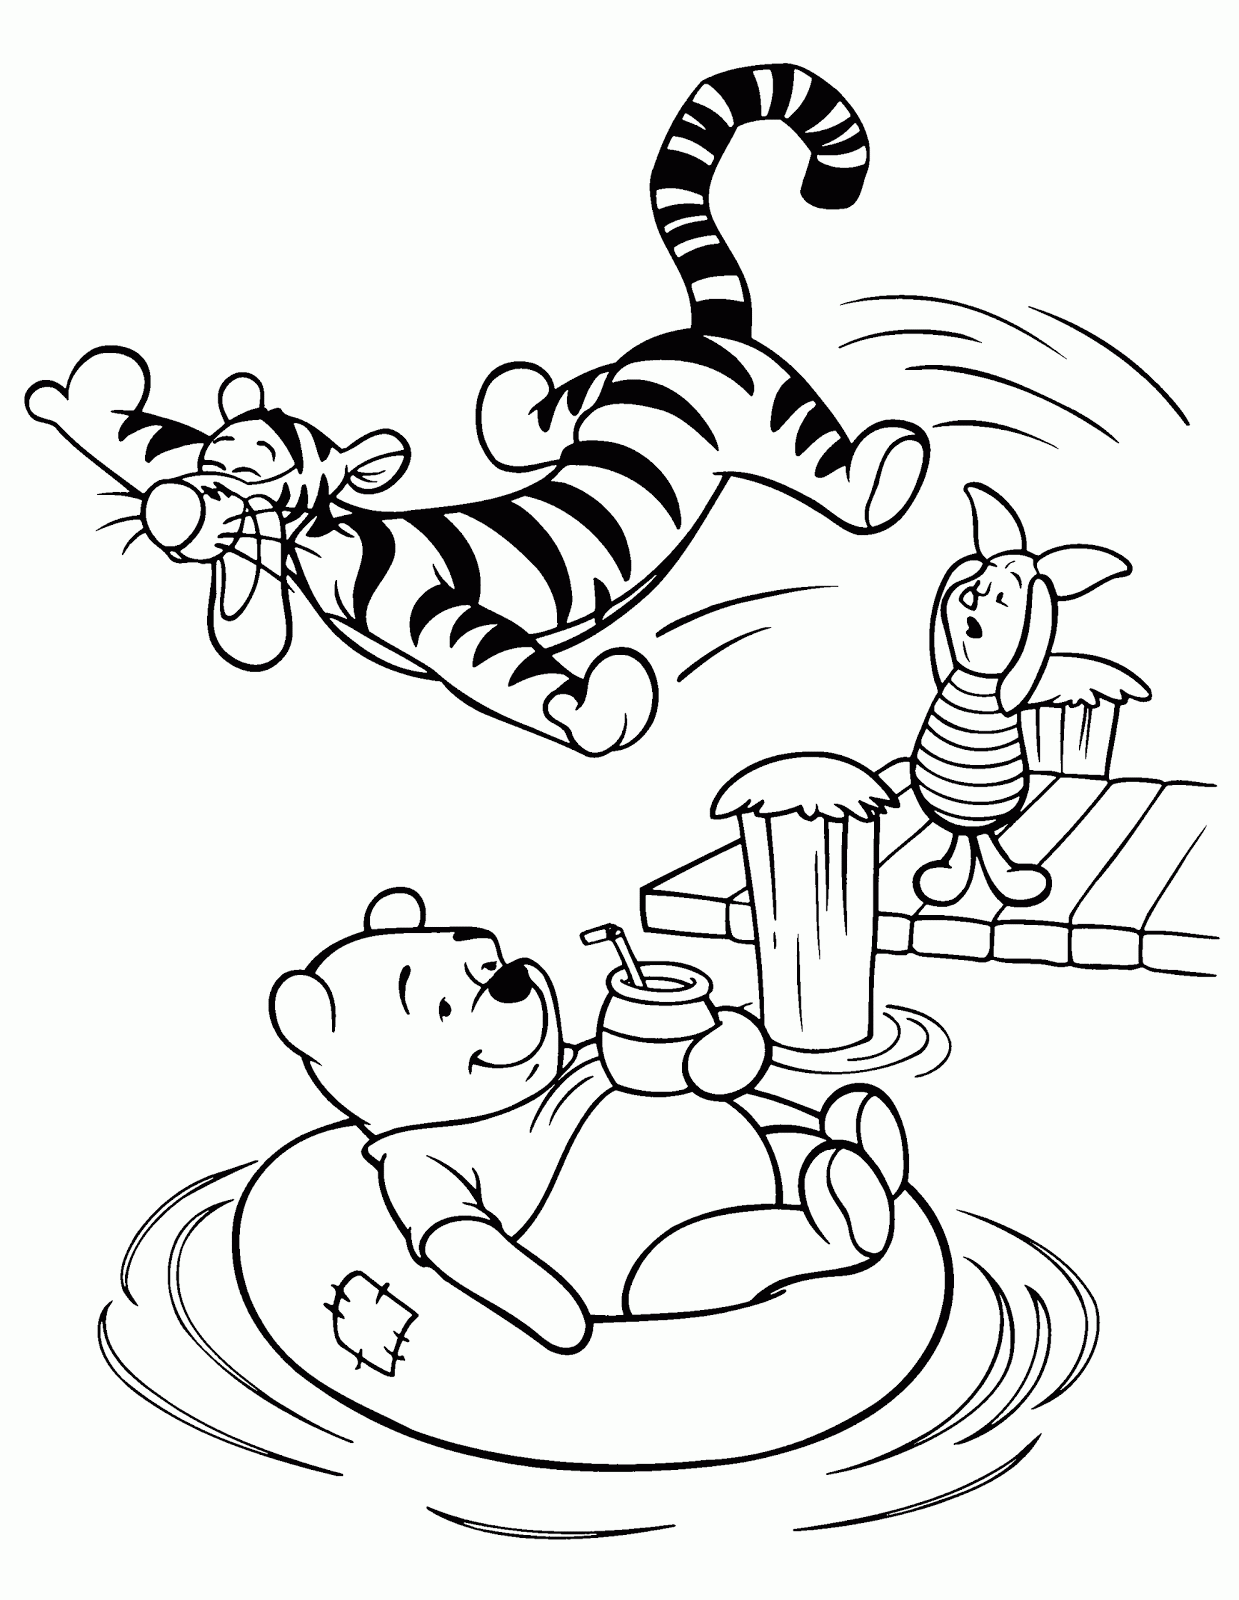 7 Walt Disney Winnie The Pooh and Friends Coloring Pages